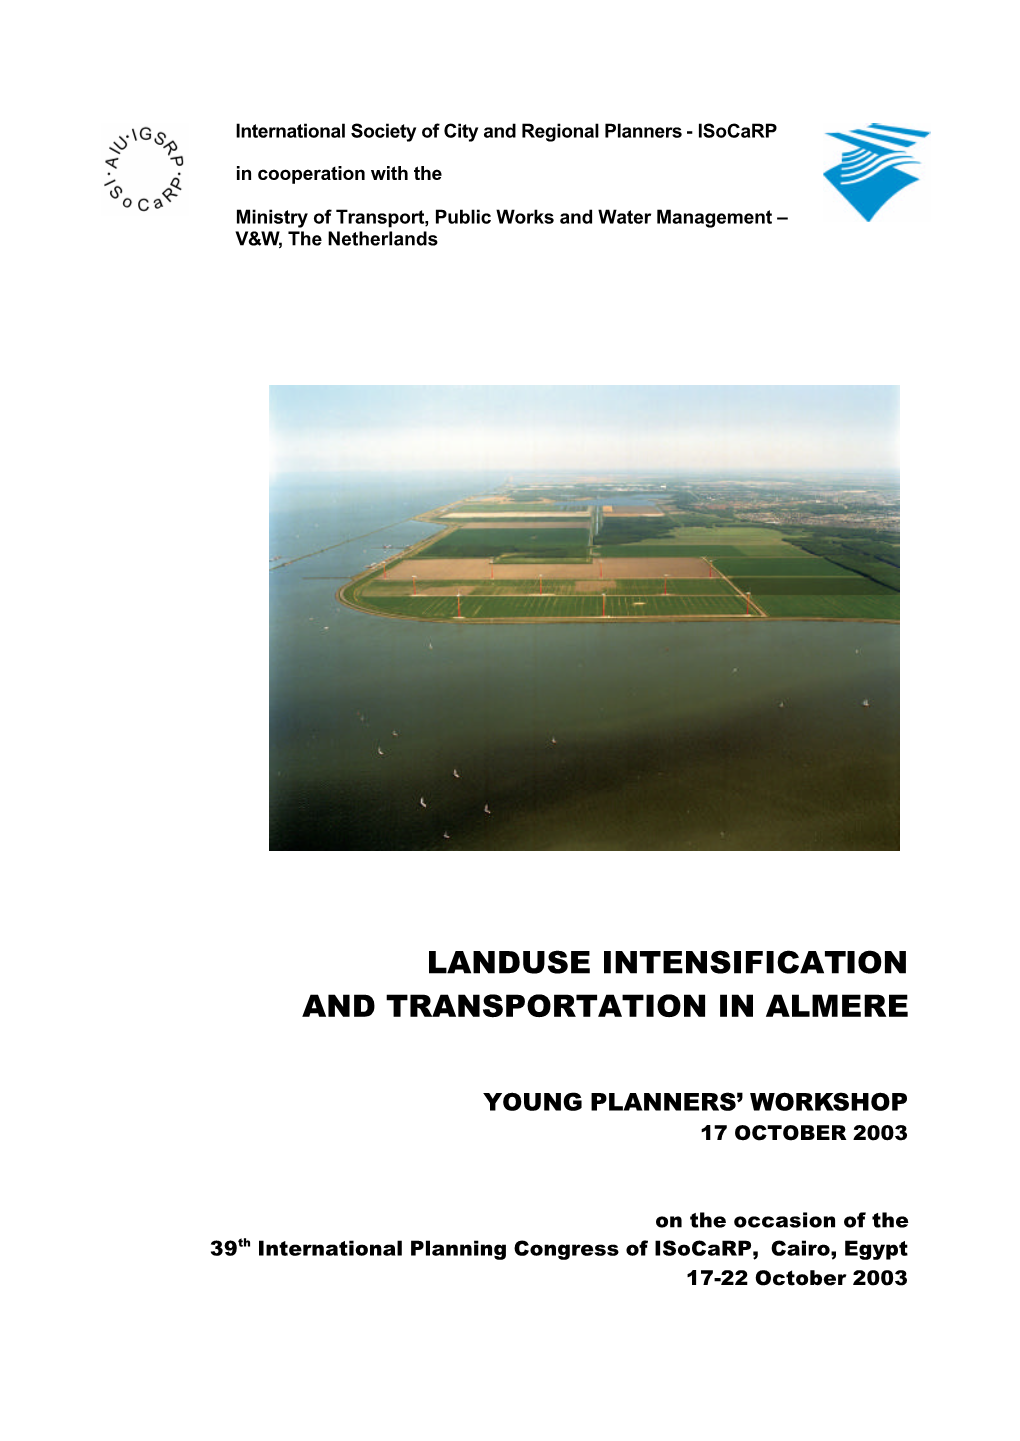 Landuse Intensification and Transportation in Almere